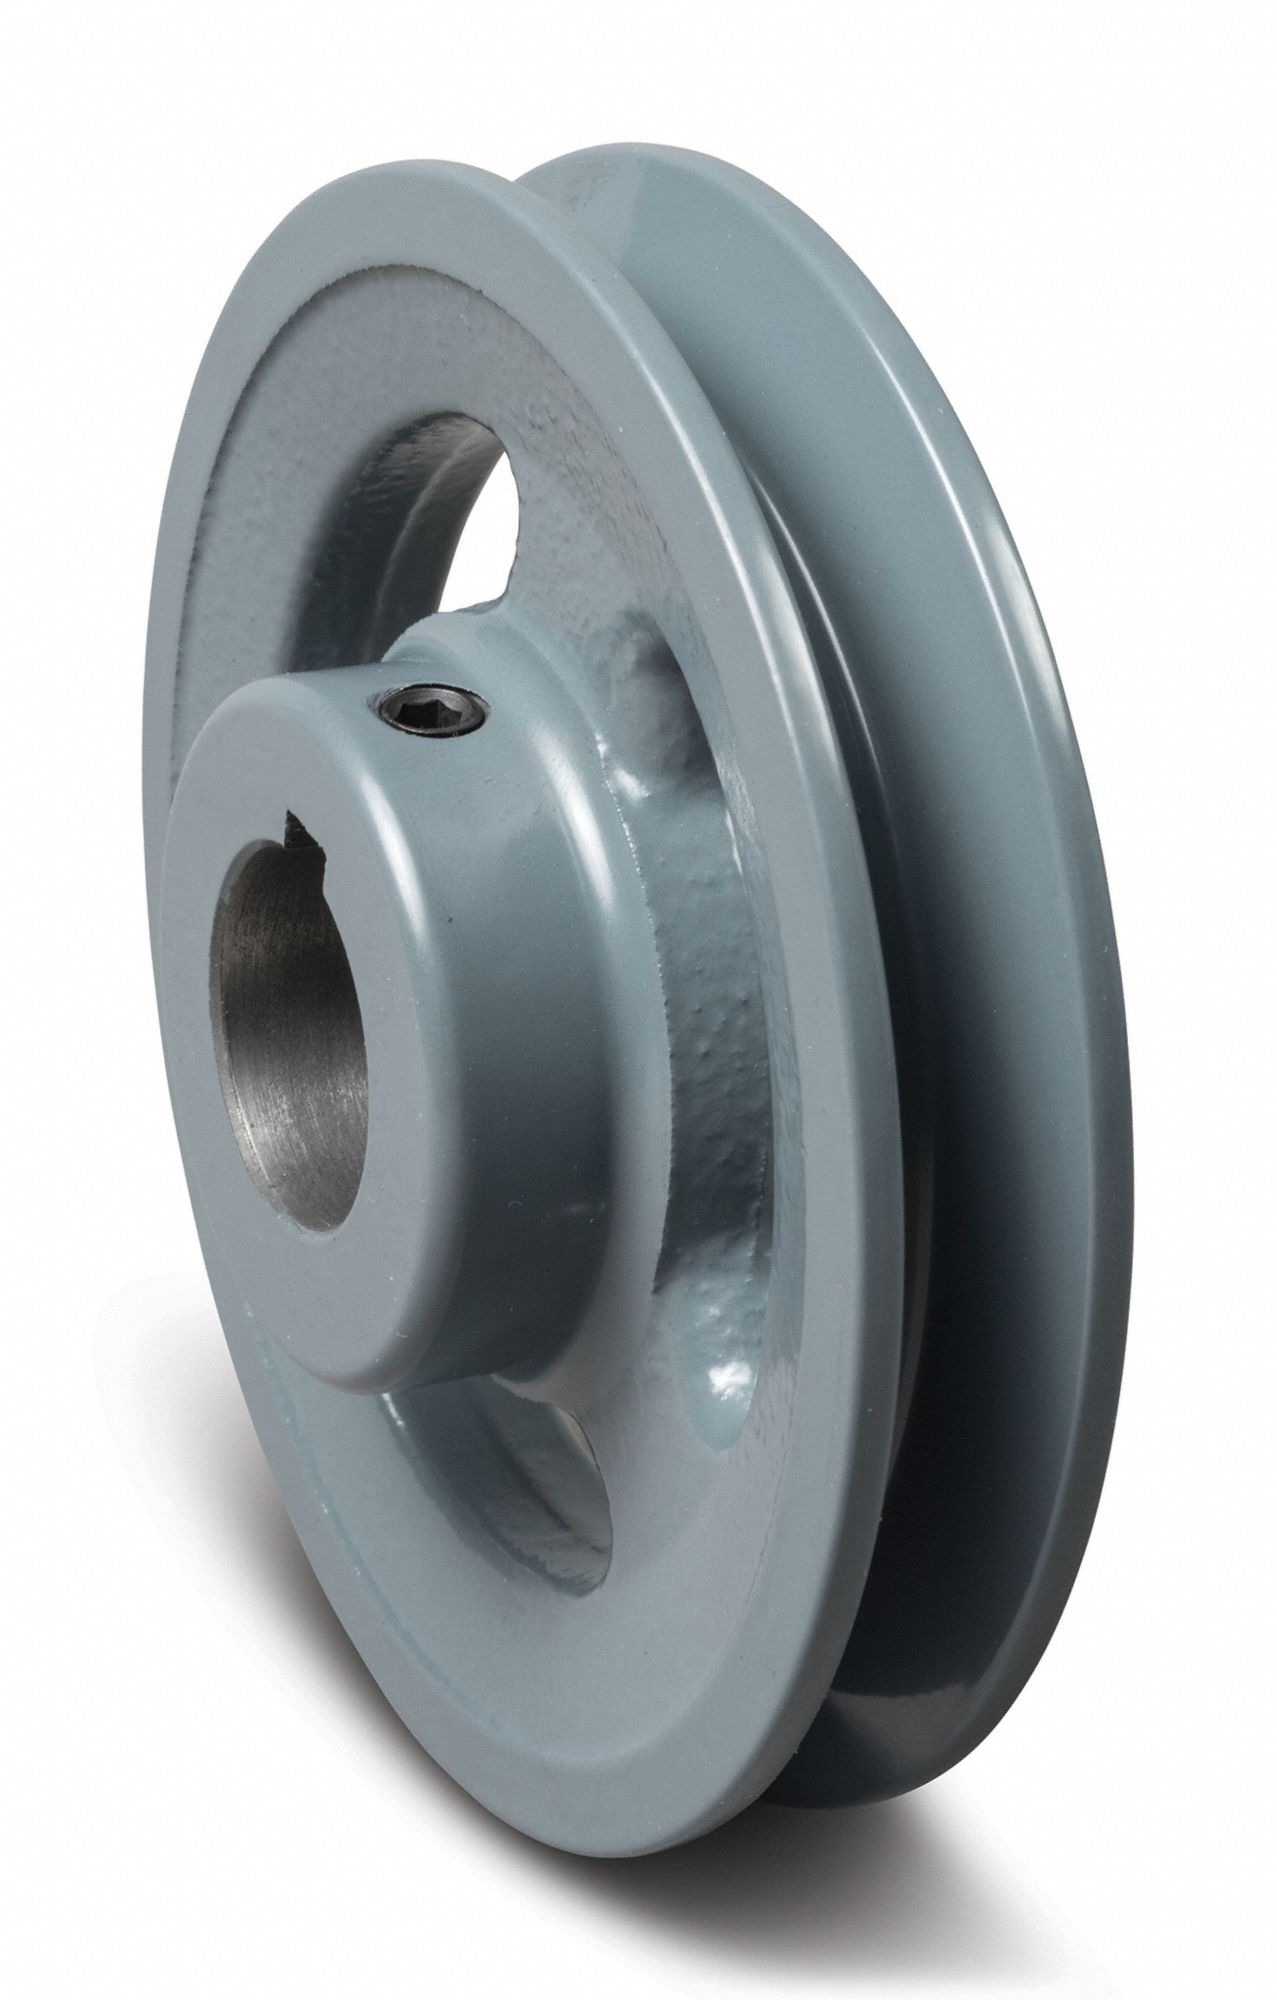 Details about   Tb Wood's Bk4558 5/8" Fixed Bore 1 Groove Standard V-Belt Pulley 4.25 In Od